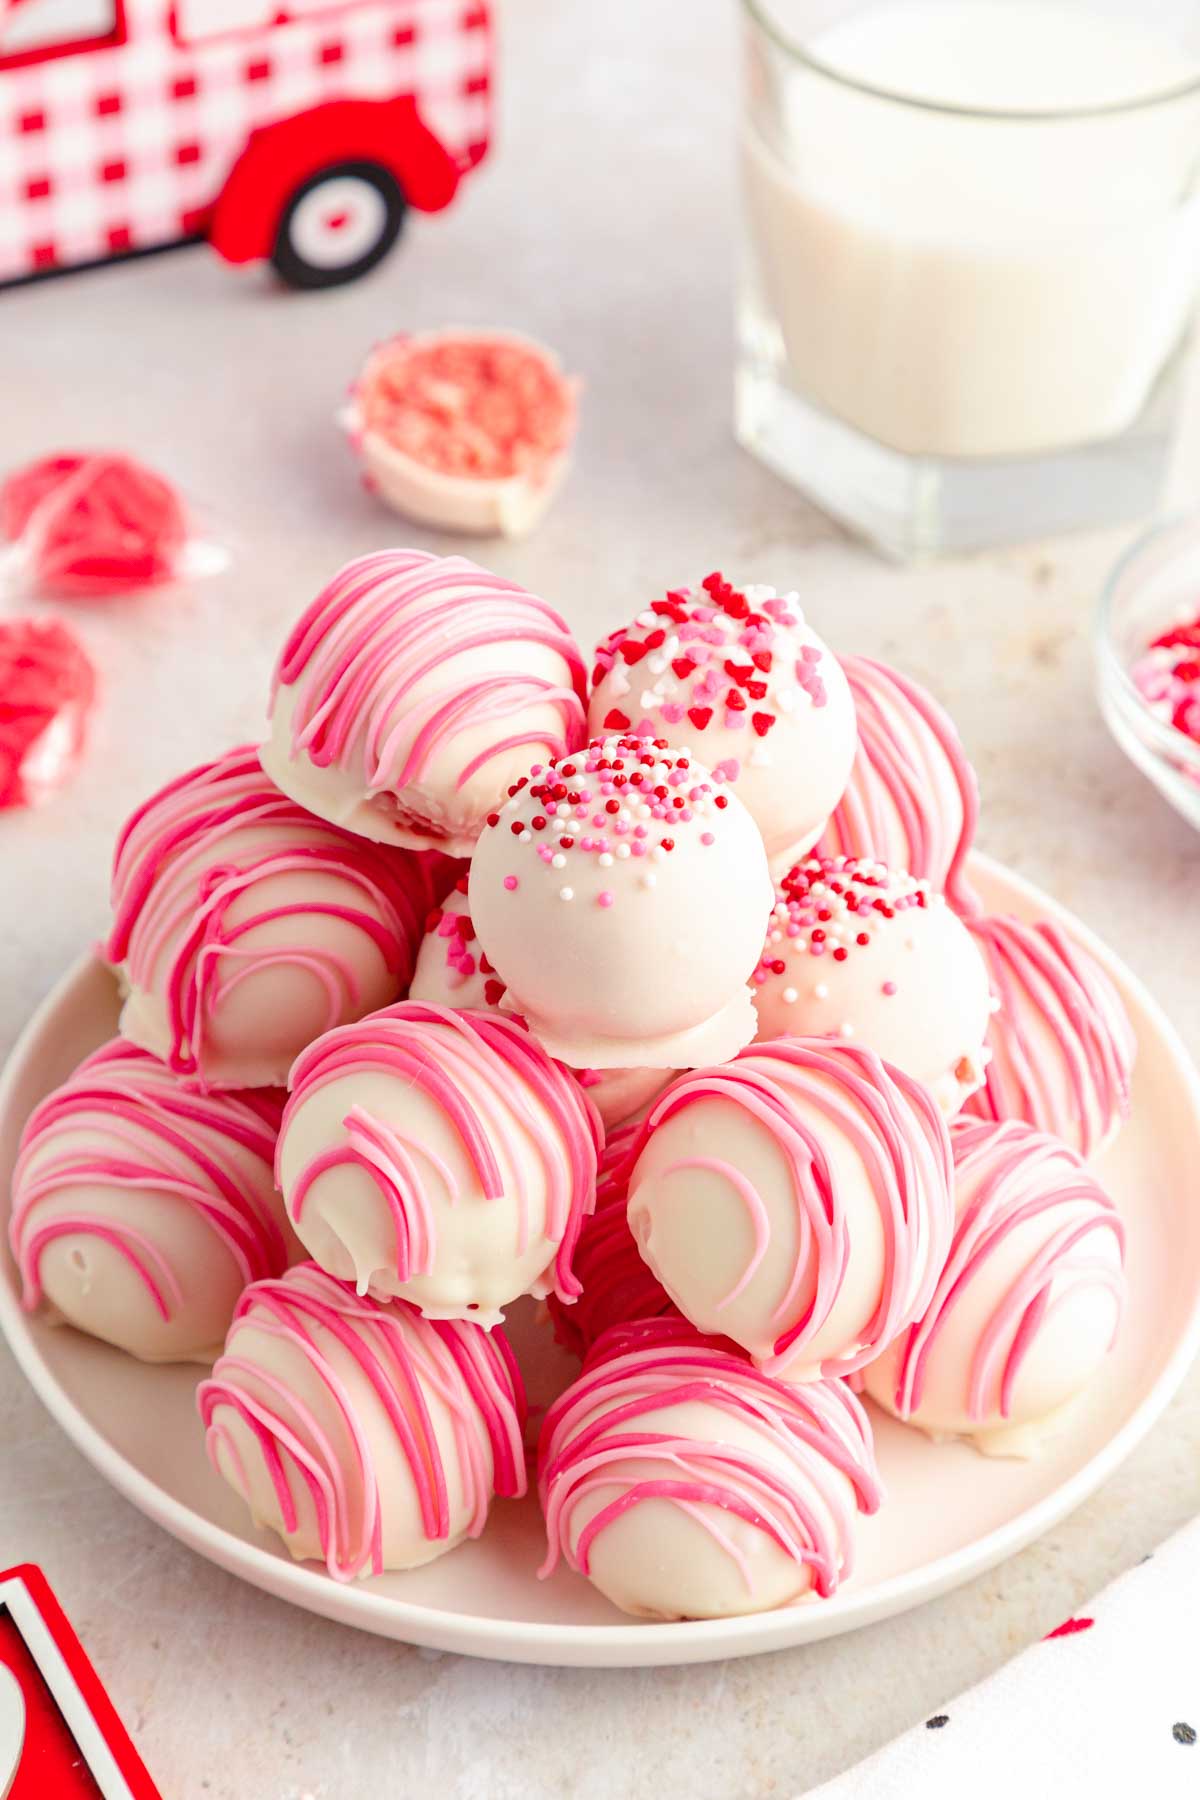 Strawberry cake balls on a white plate.